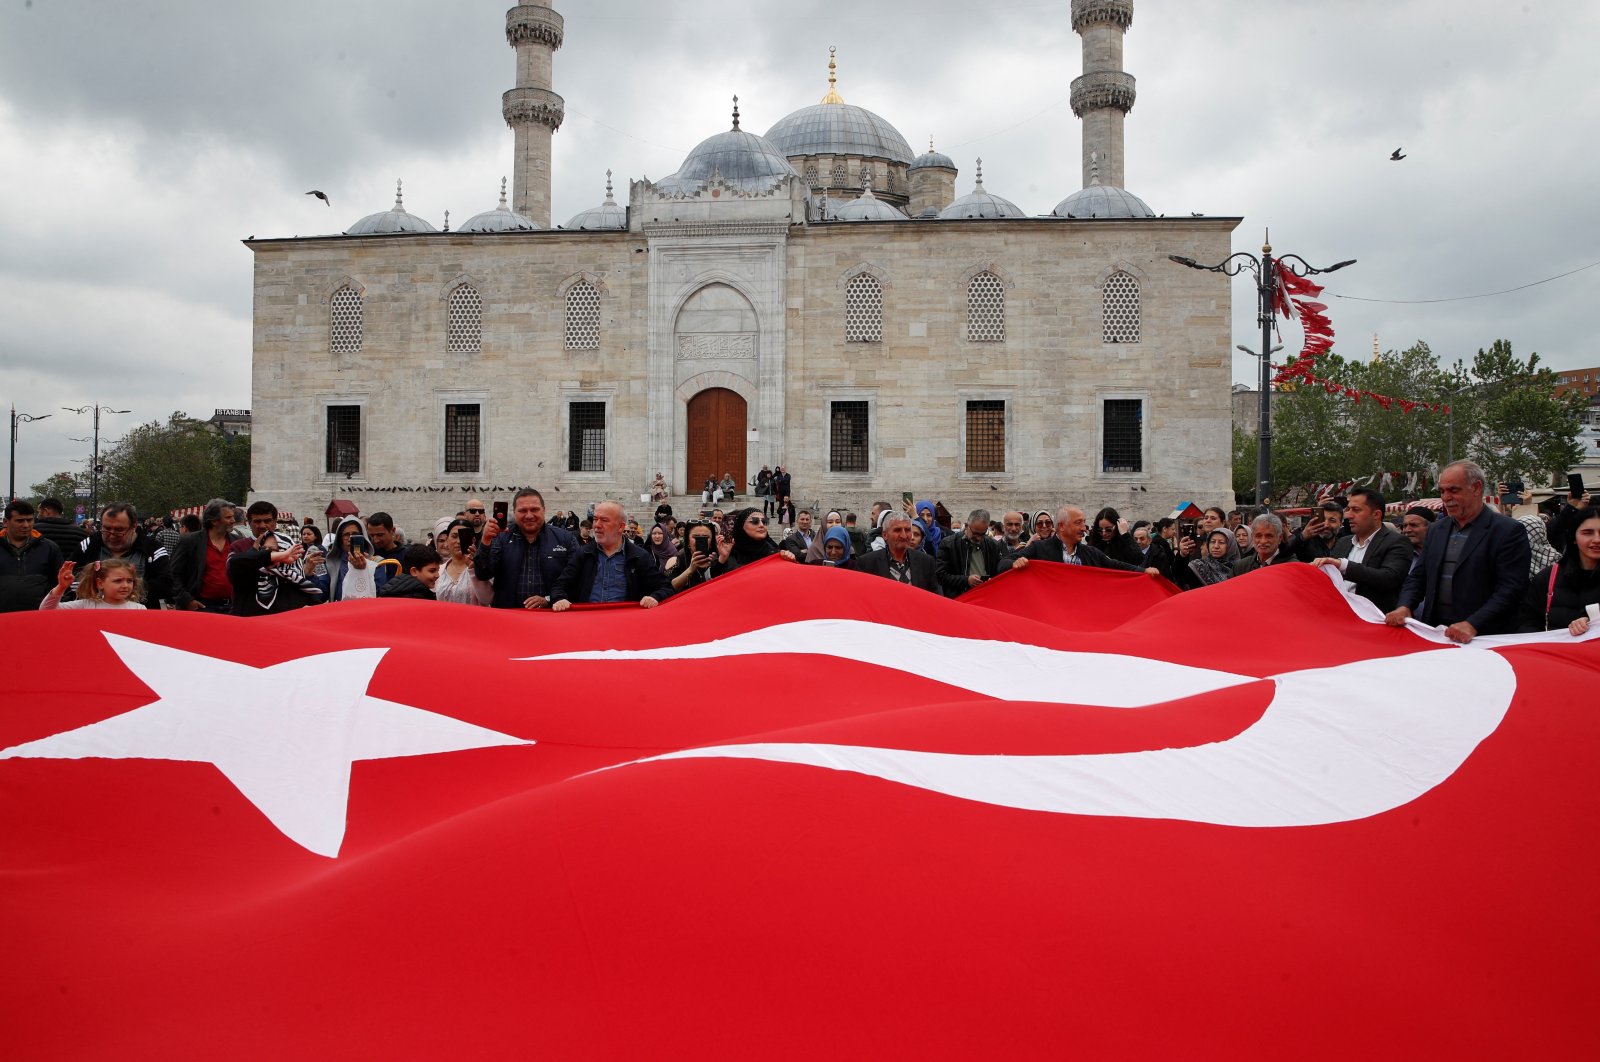 Supporters of President Recep Tayyip Erdoğan hold a large Turkish flag at an election campaign point, ahead of the May 28 runoff vote, in Istanbul, Türkiye, May 20, 2023. (Reuters Photo)